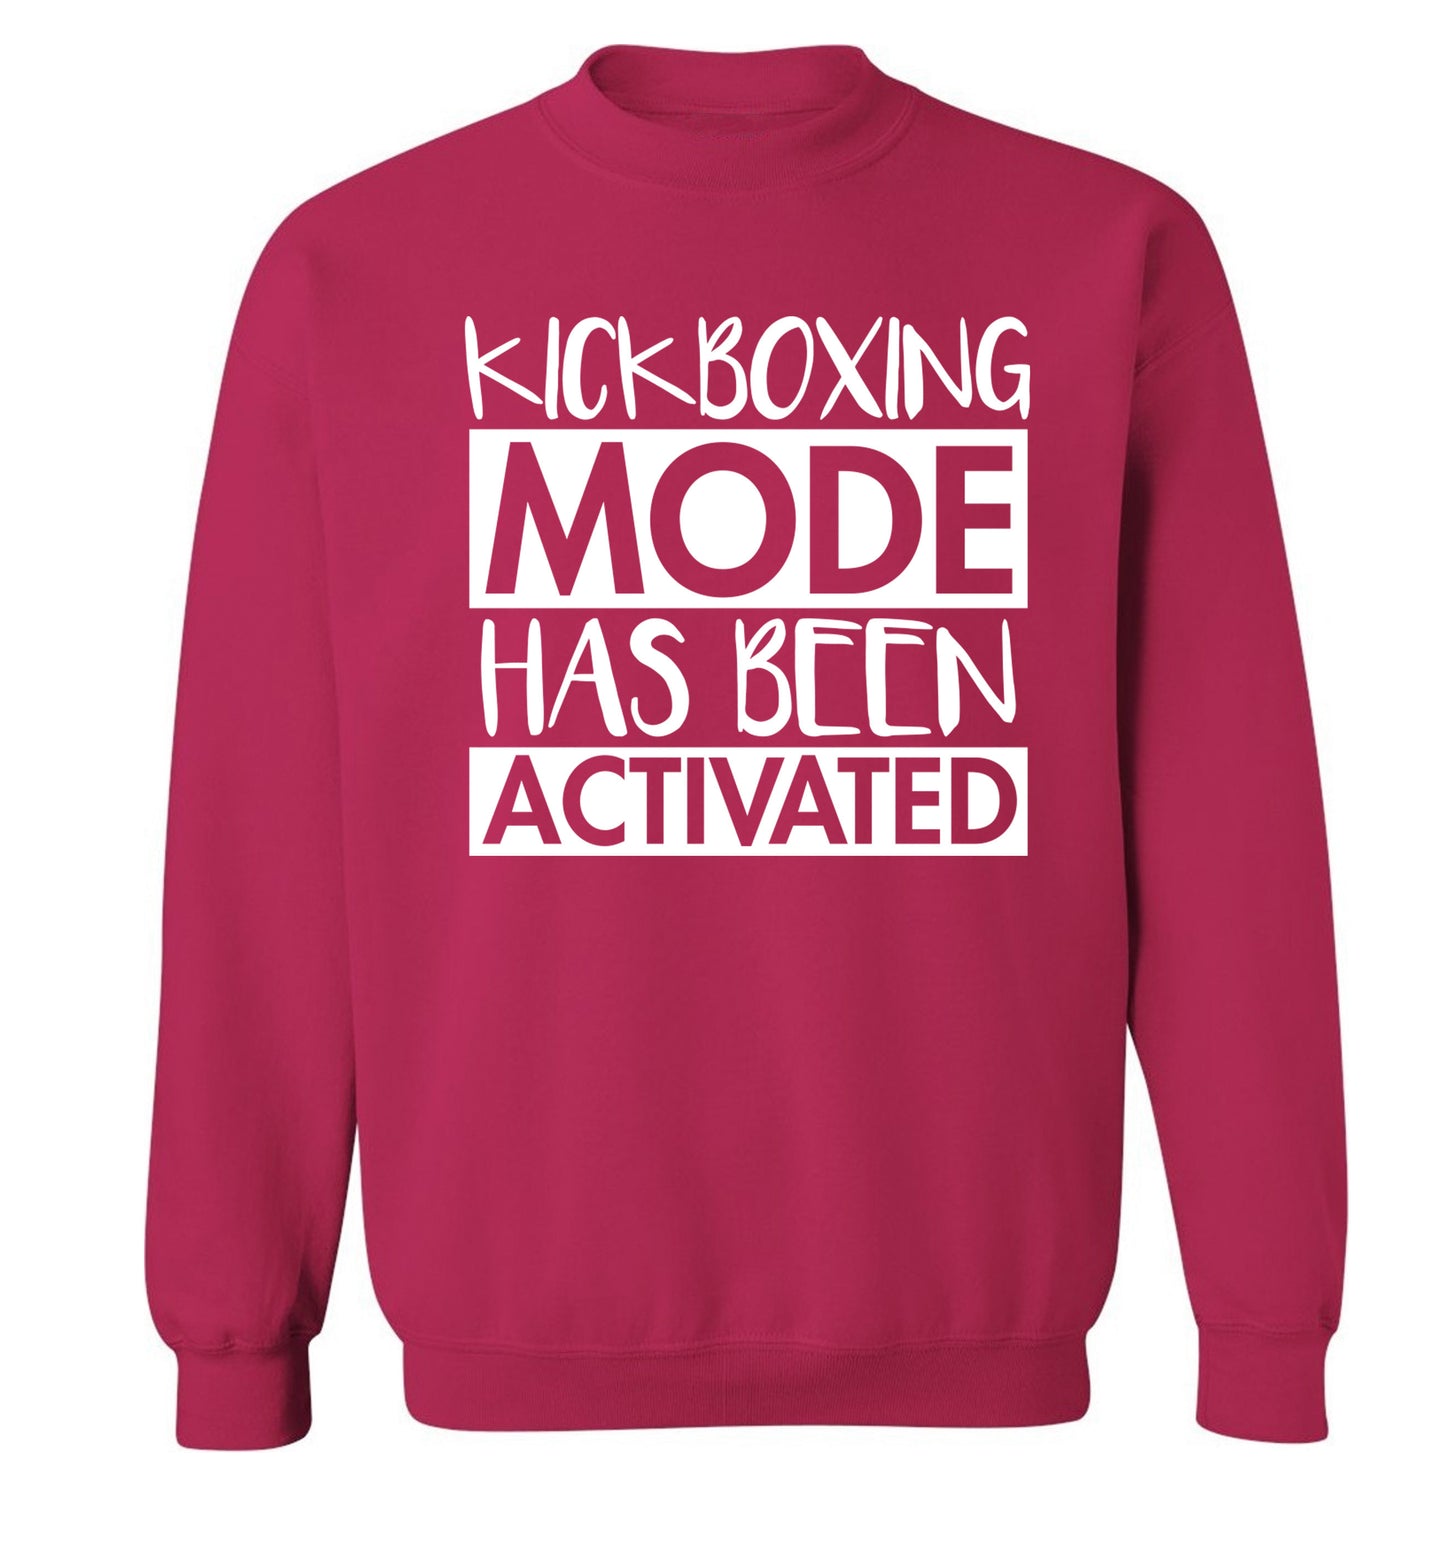 Kickboxing mode activated Adult's unisex pink Sweater 2XL